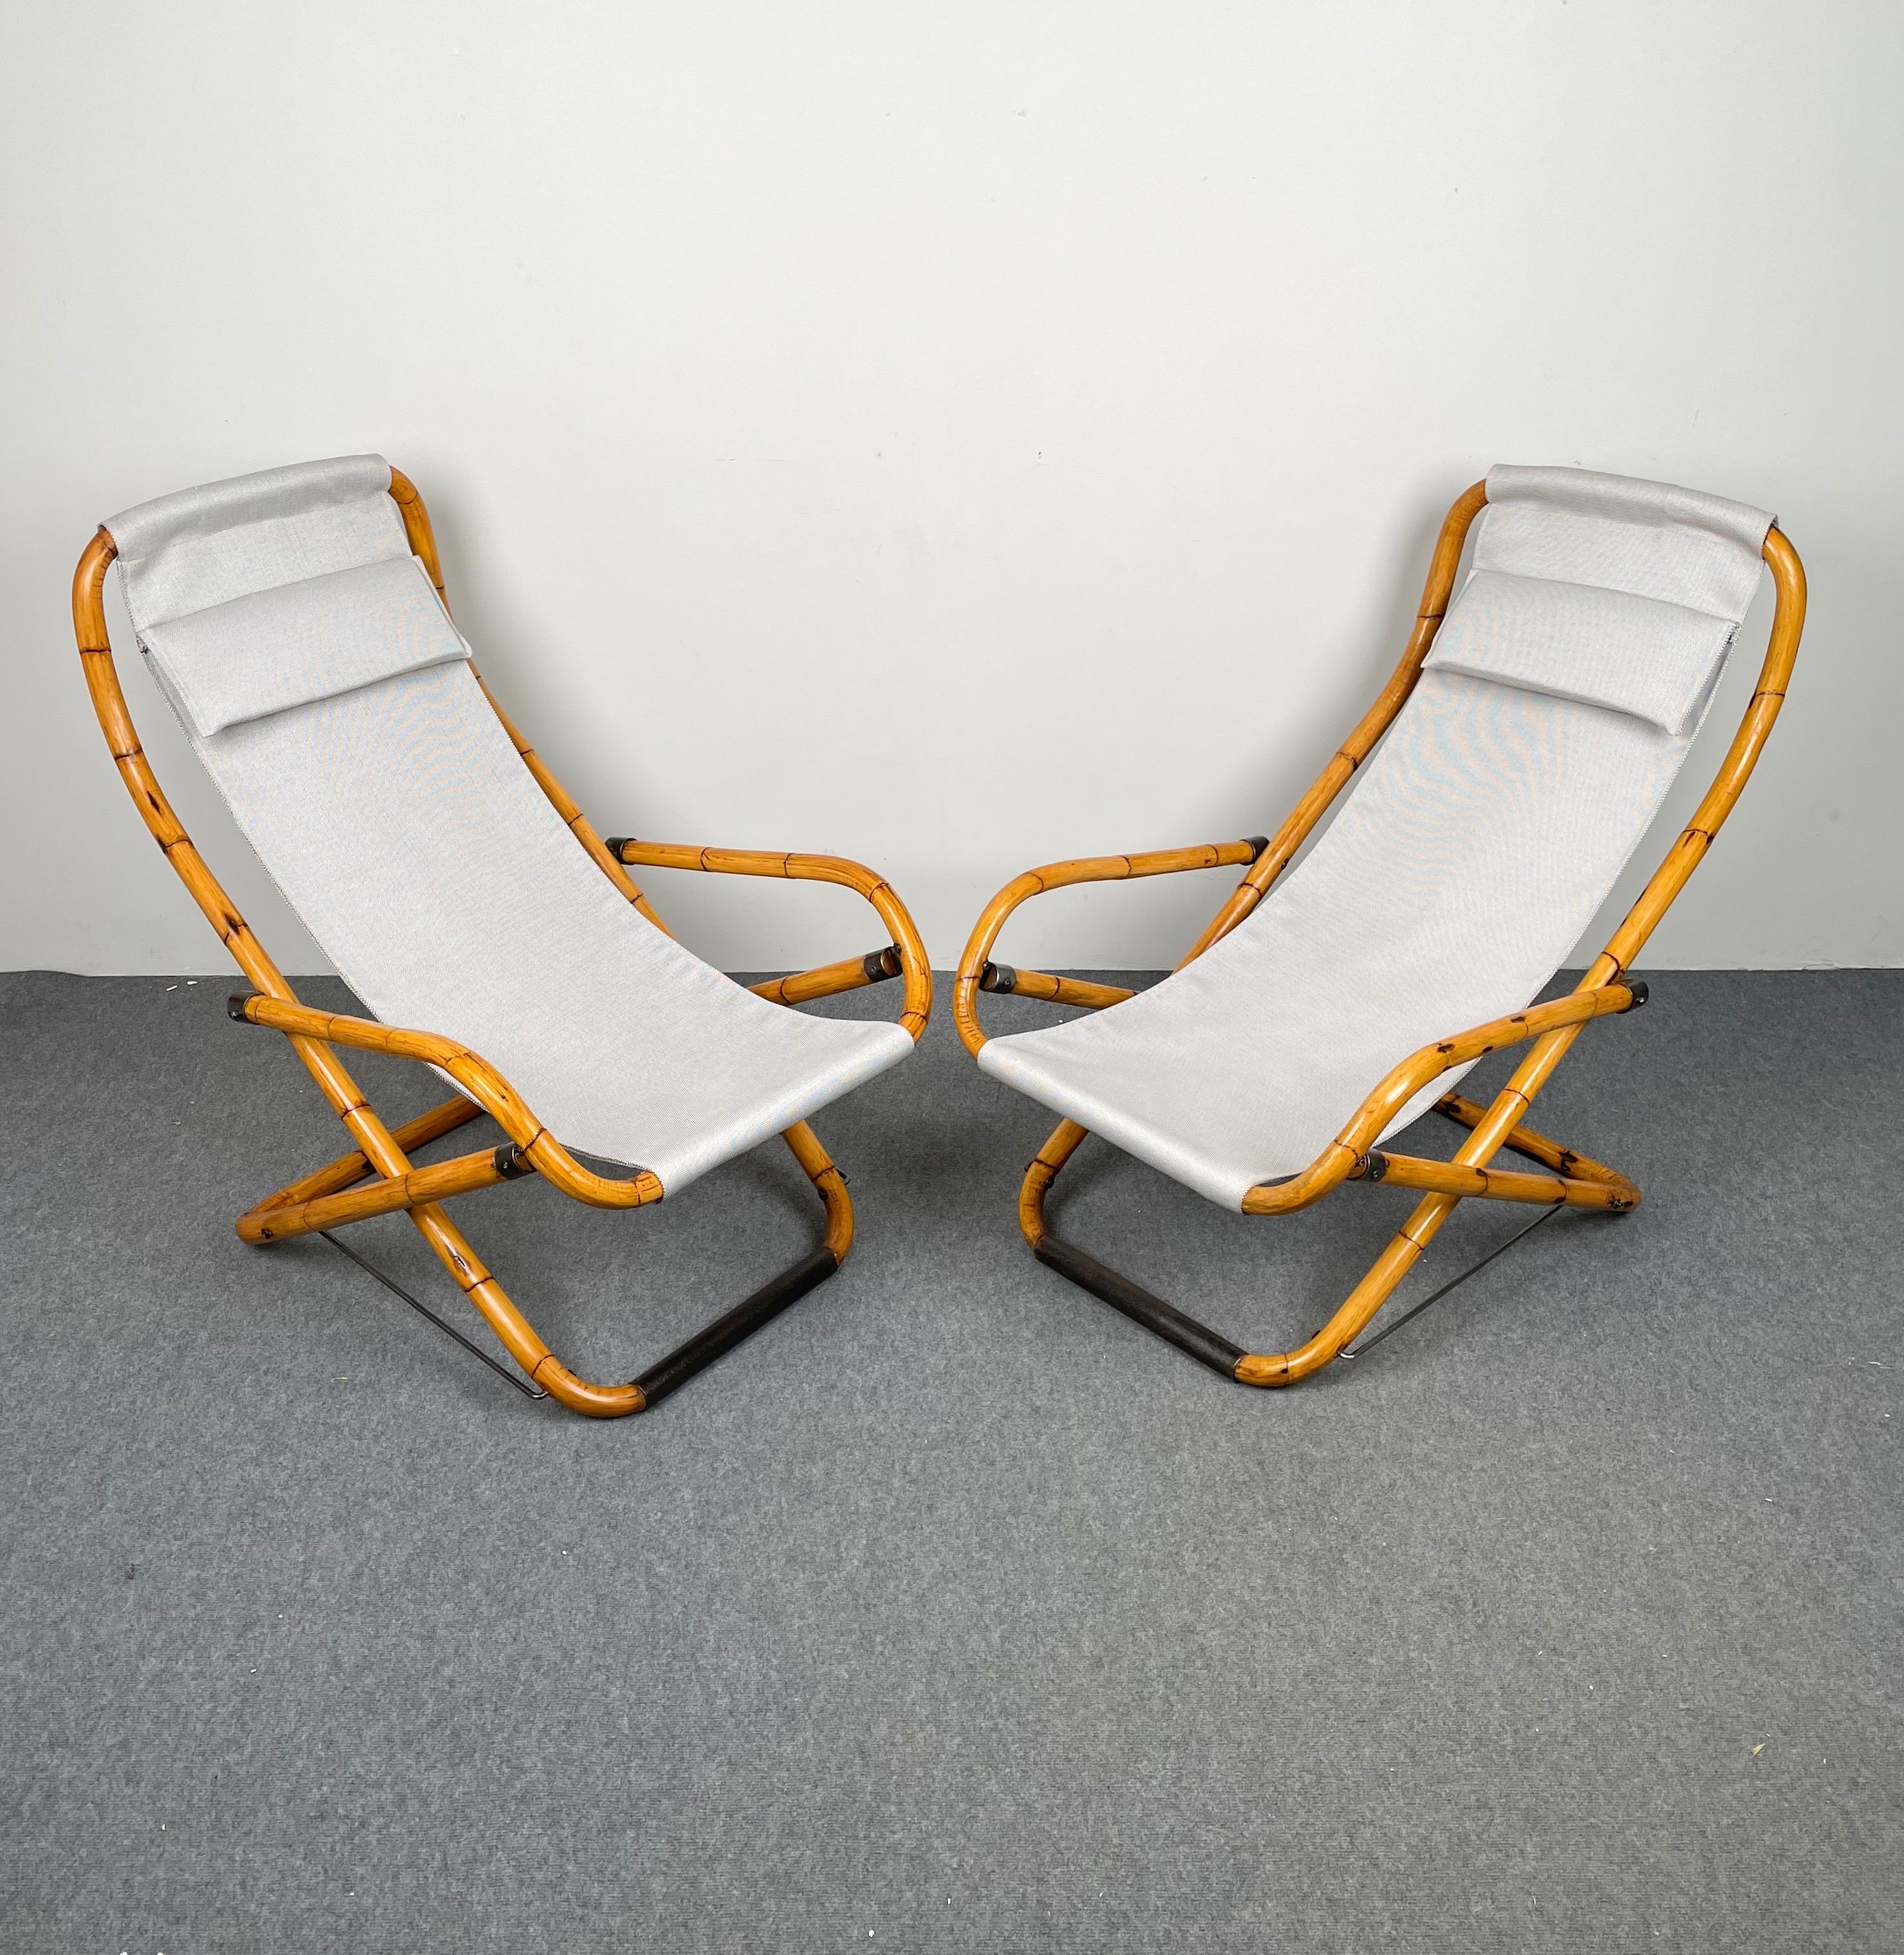 Pair of Bamboo, Iron and Fabric Folding Lounge Deck Chair, Italy, 1960s For Sale 2